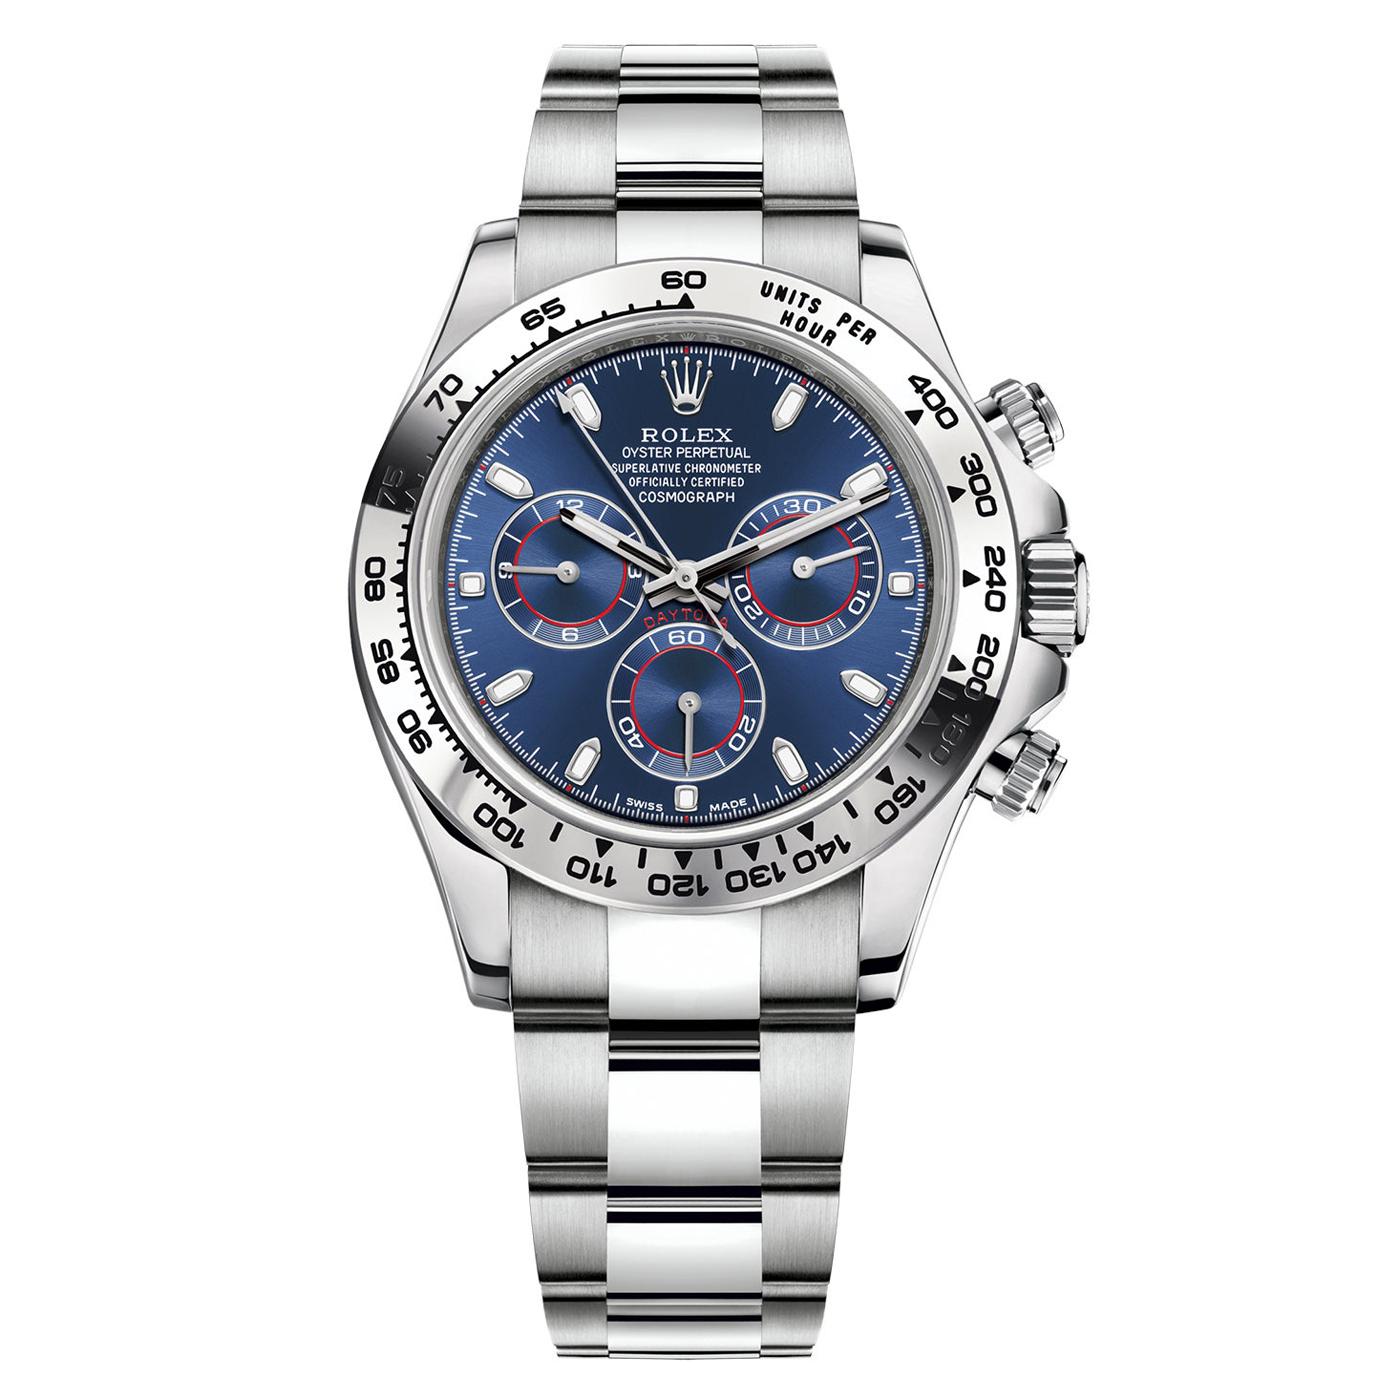 Rolex Daytona Oyster Perpetual Cosmograph 18k White Gold Blue Dial 116509